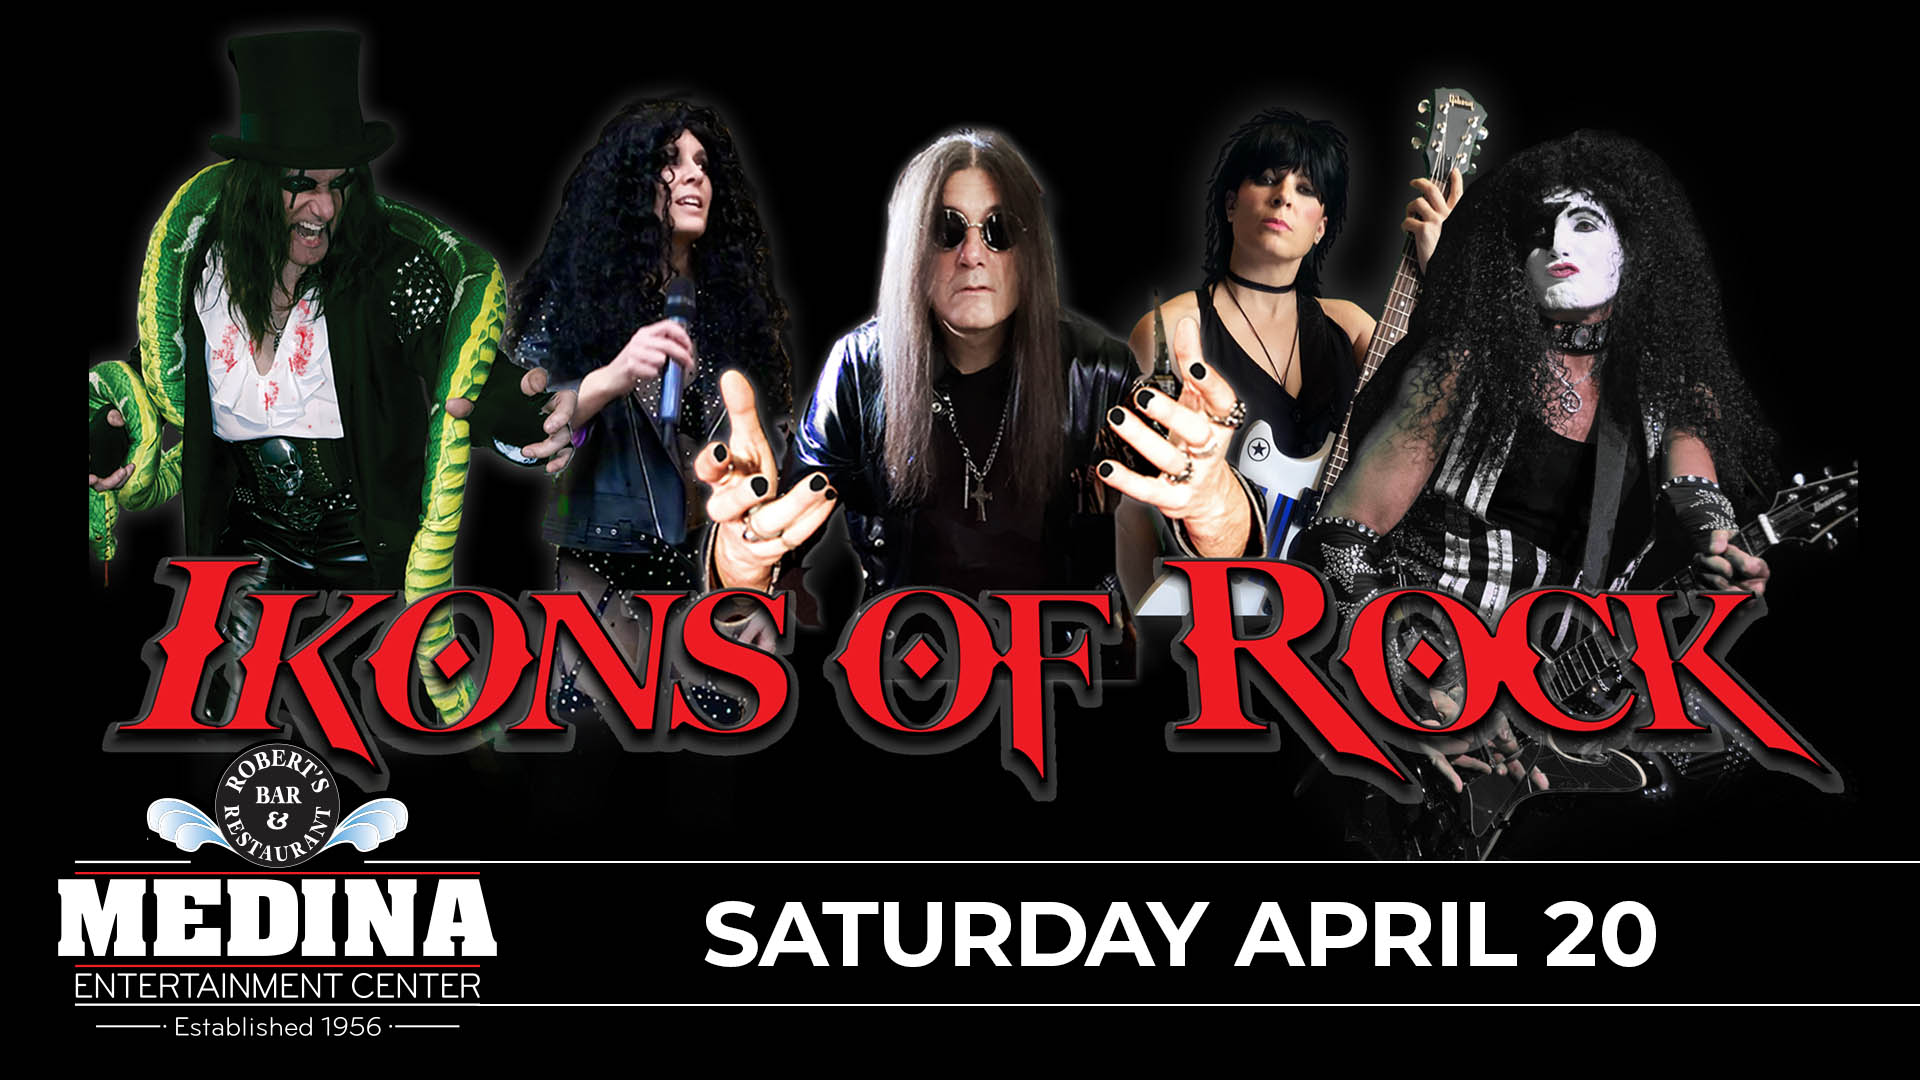 Ikons Of Rock The Arena Rock Legends Medina Entertainment Center Saturday, April 20th, 2024 Doors: 7:00PM | Music 8:00pm | 21+ Tickets on-sale Friday, March 8th at 11am Gold Seating $36 / Silver Reserved $31 / General Reserved $26 plus applicable fees